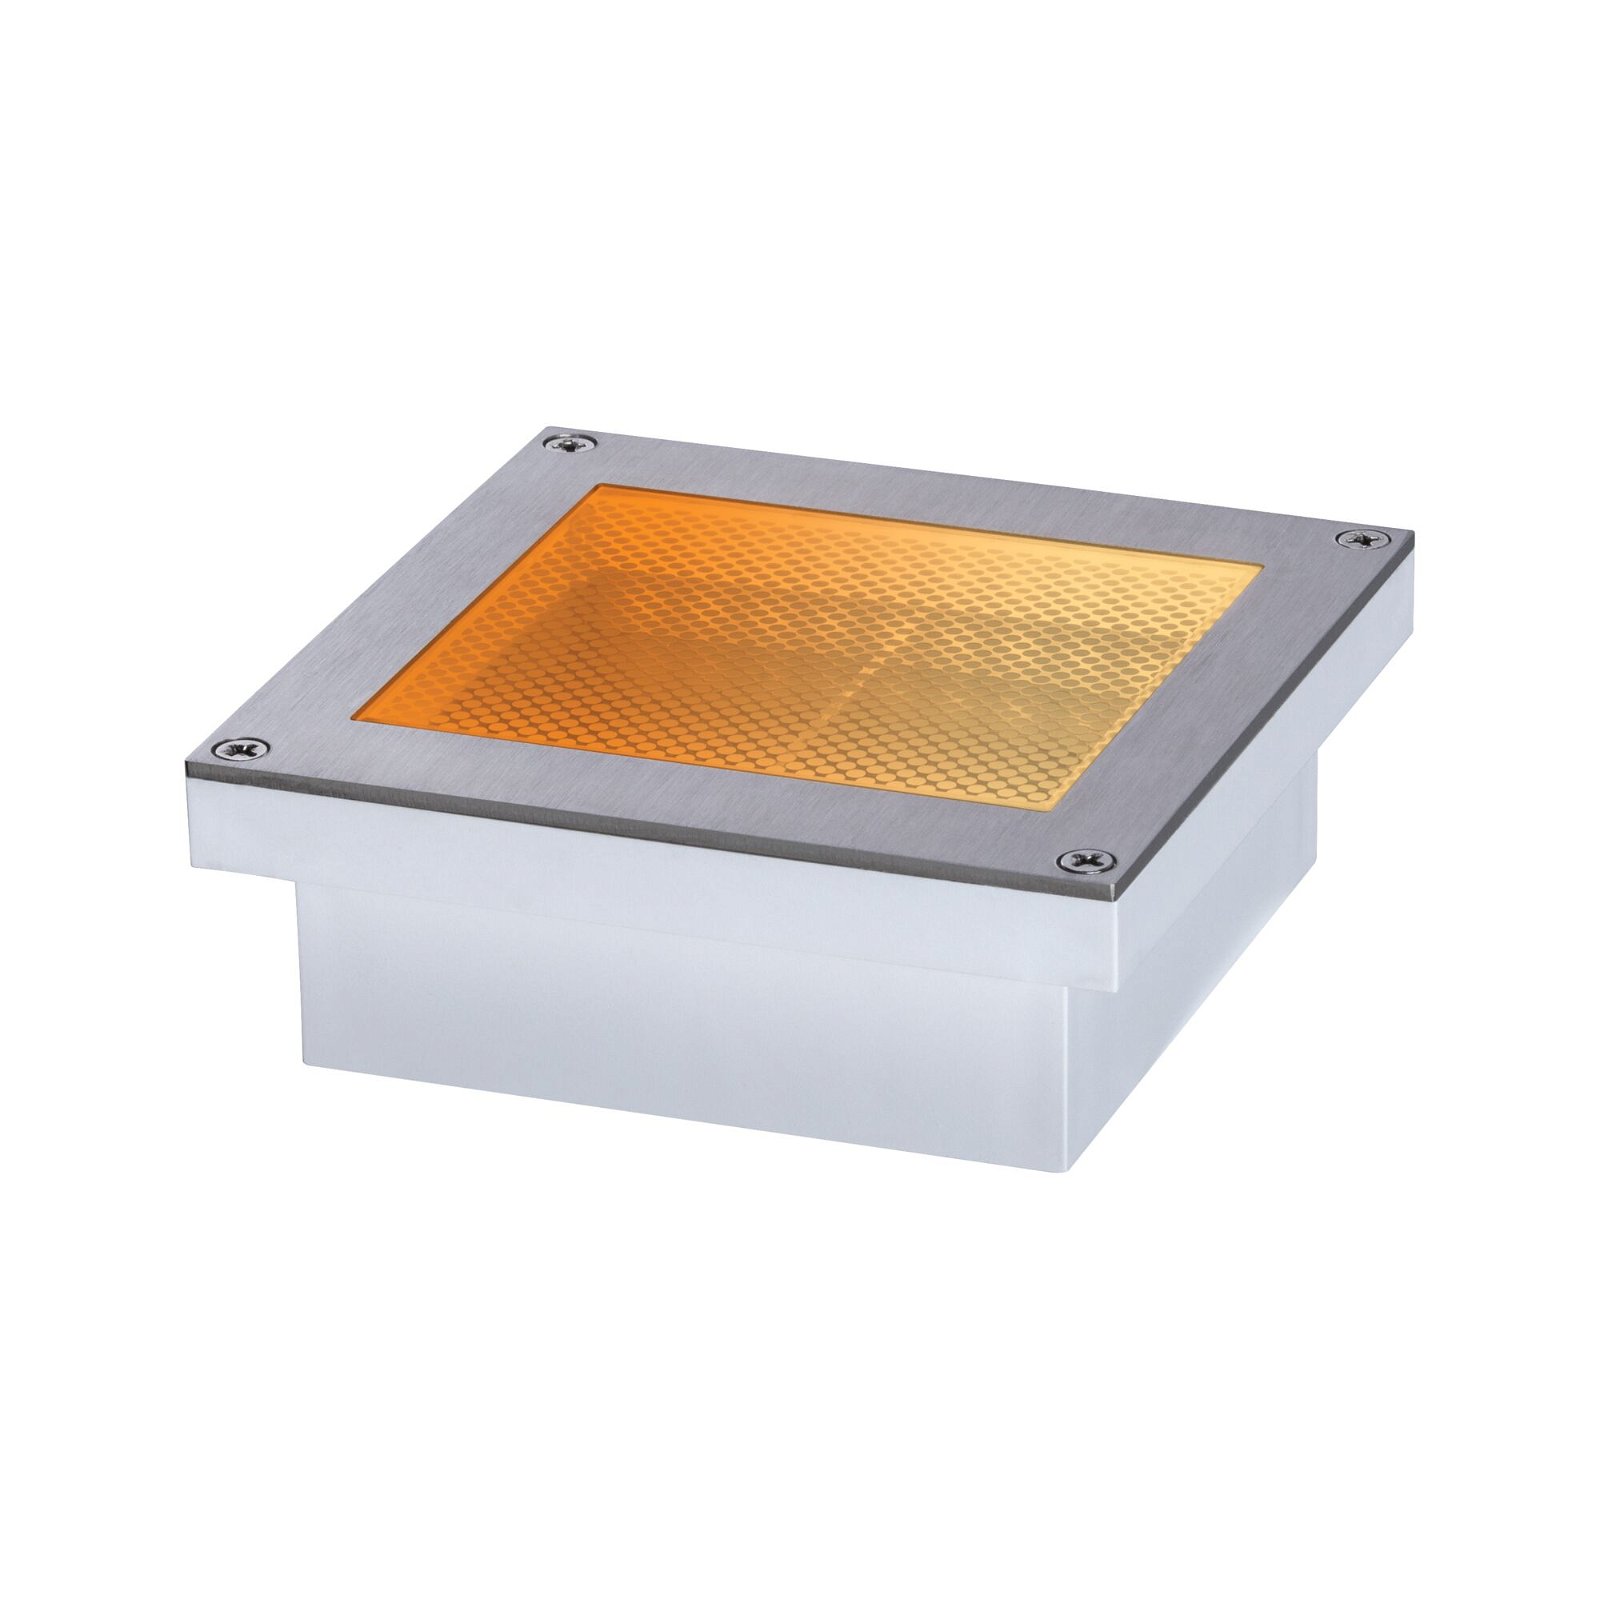 LED Recessed floor luminaire Smart Home Zigbee Brick insect-friendly IP67 square 100x100mm Tunable Warm 1W 18lm 230V Stainless steel Stainless steel